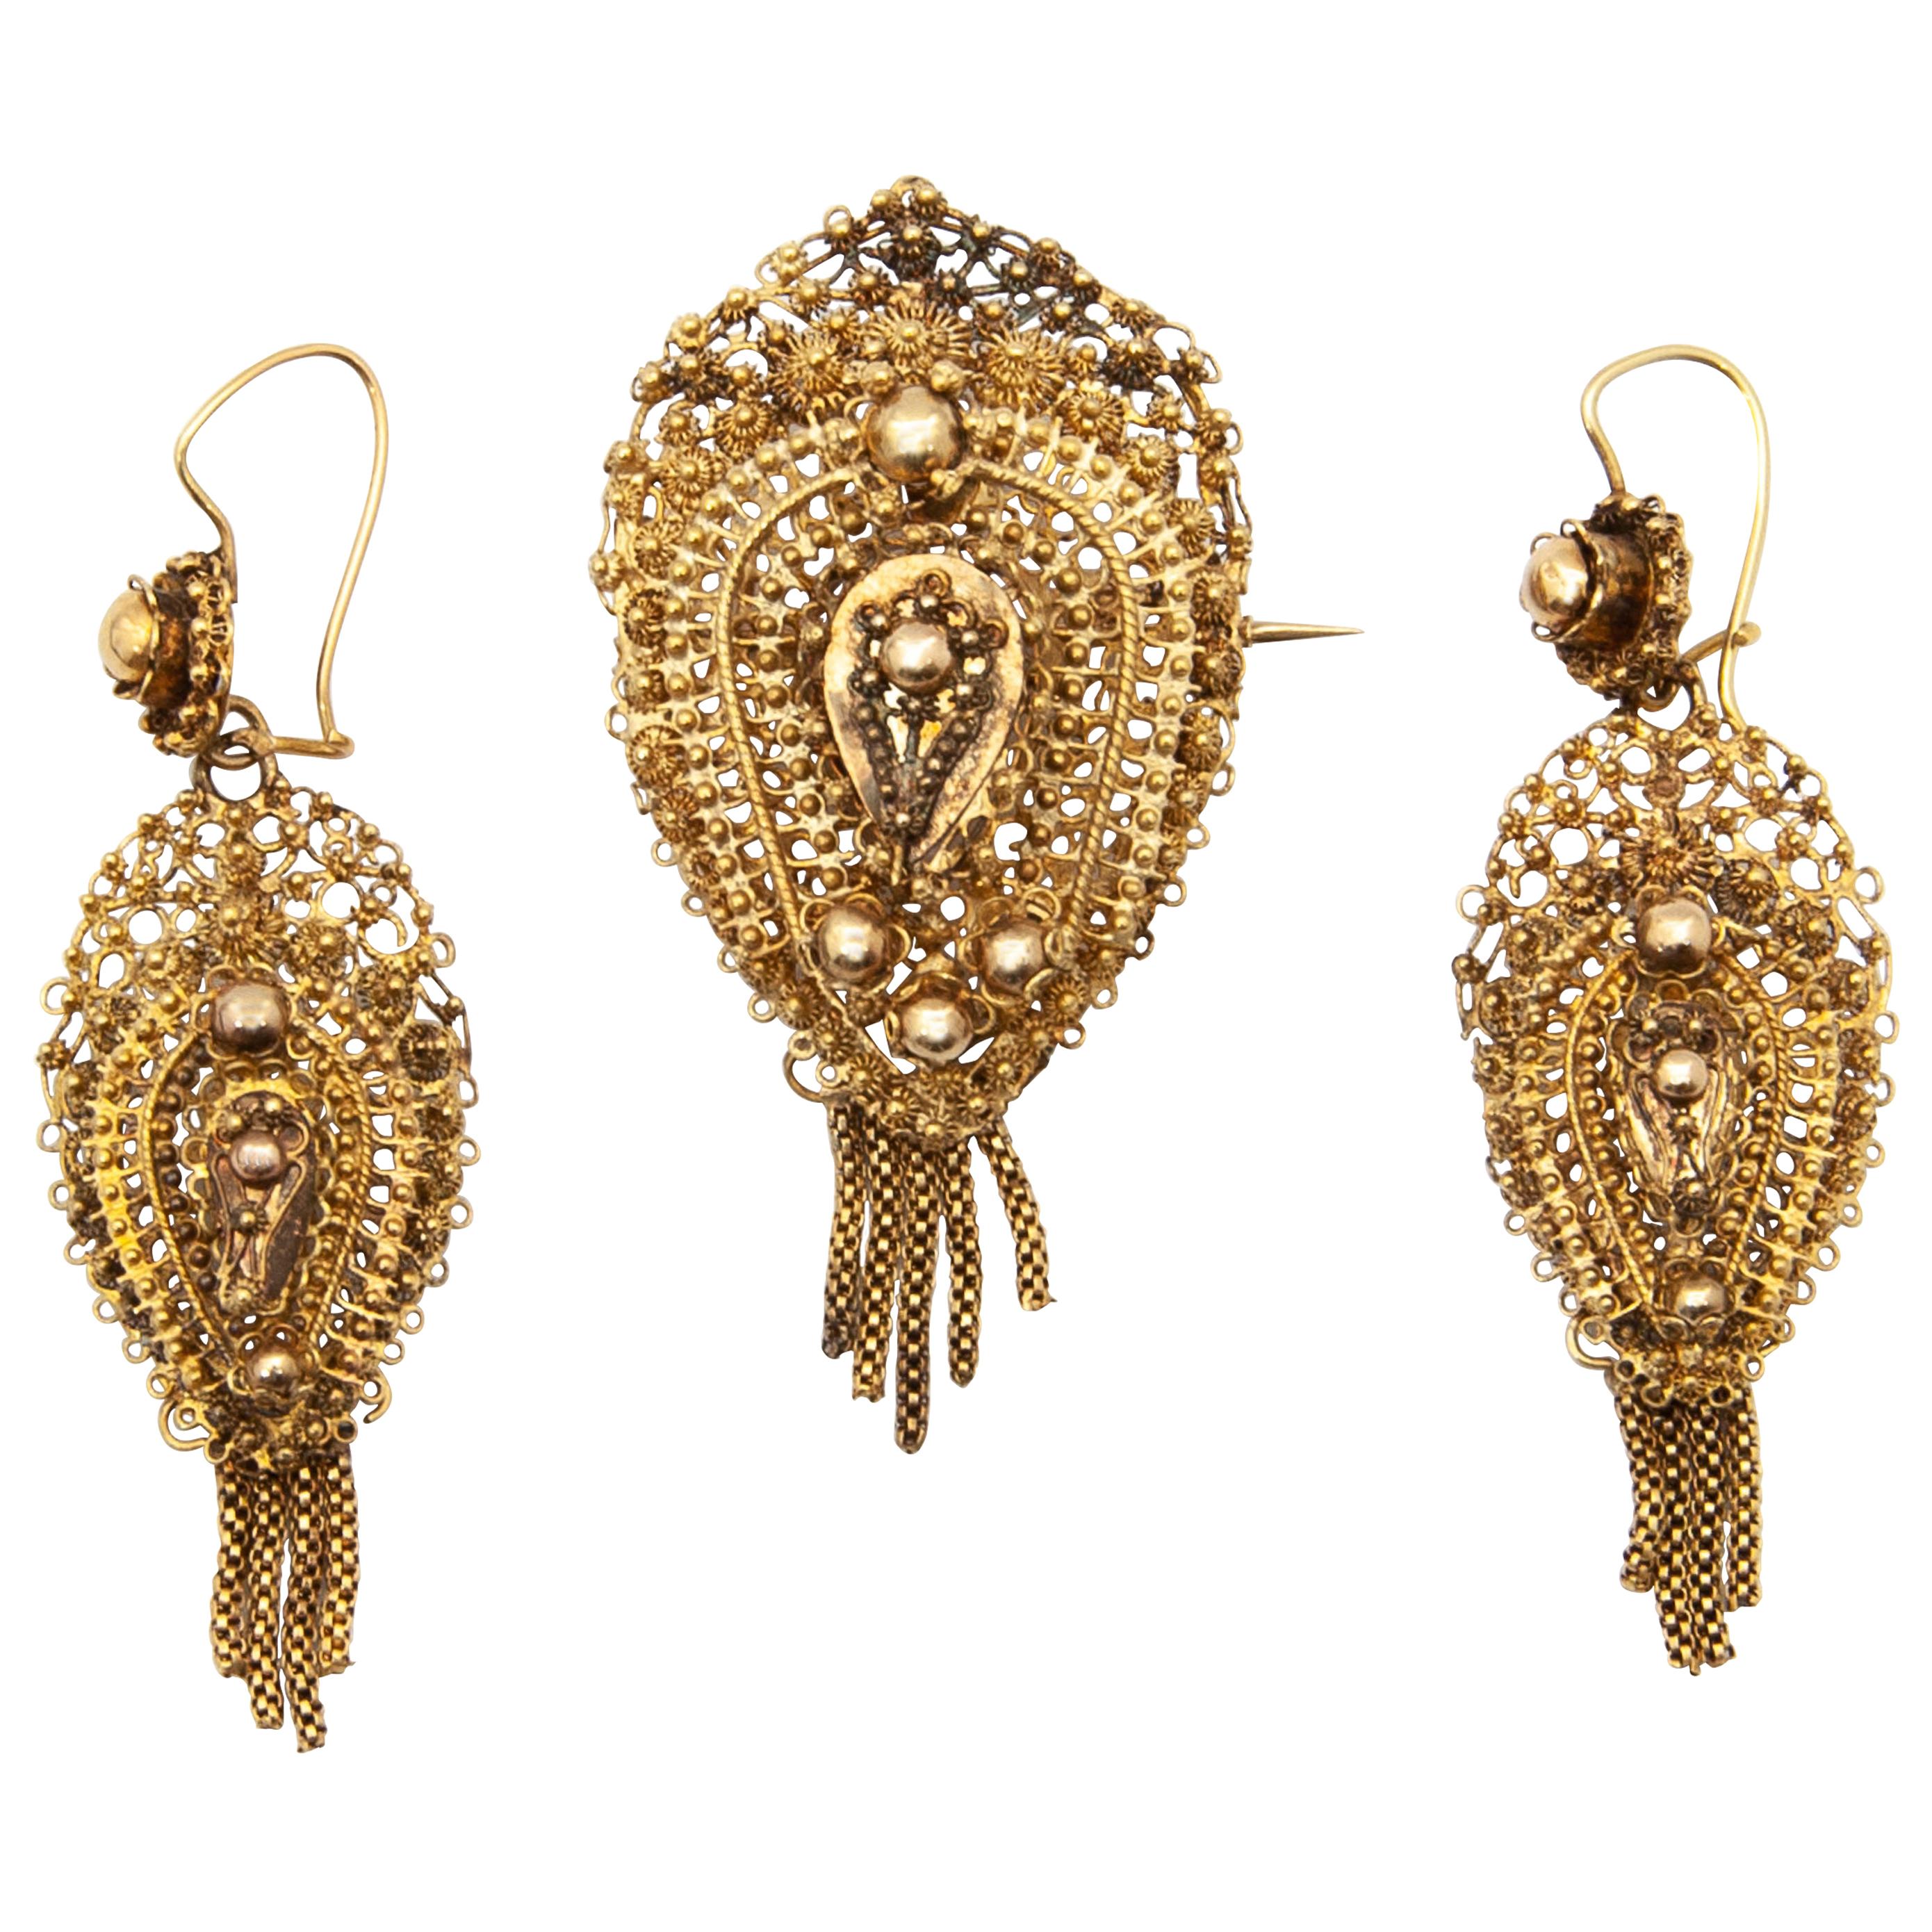 Antique 1880's 14K Gold Filigree Earrings and Brooch